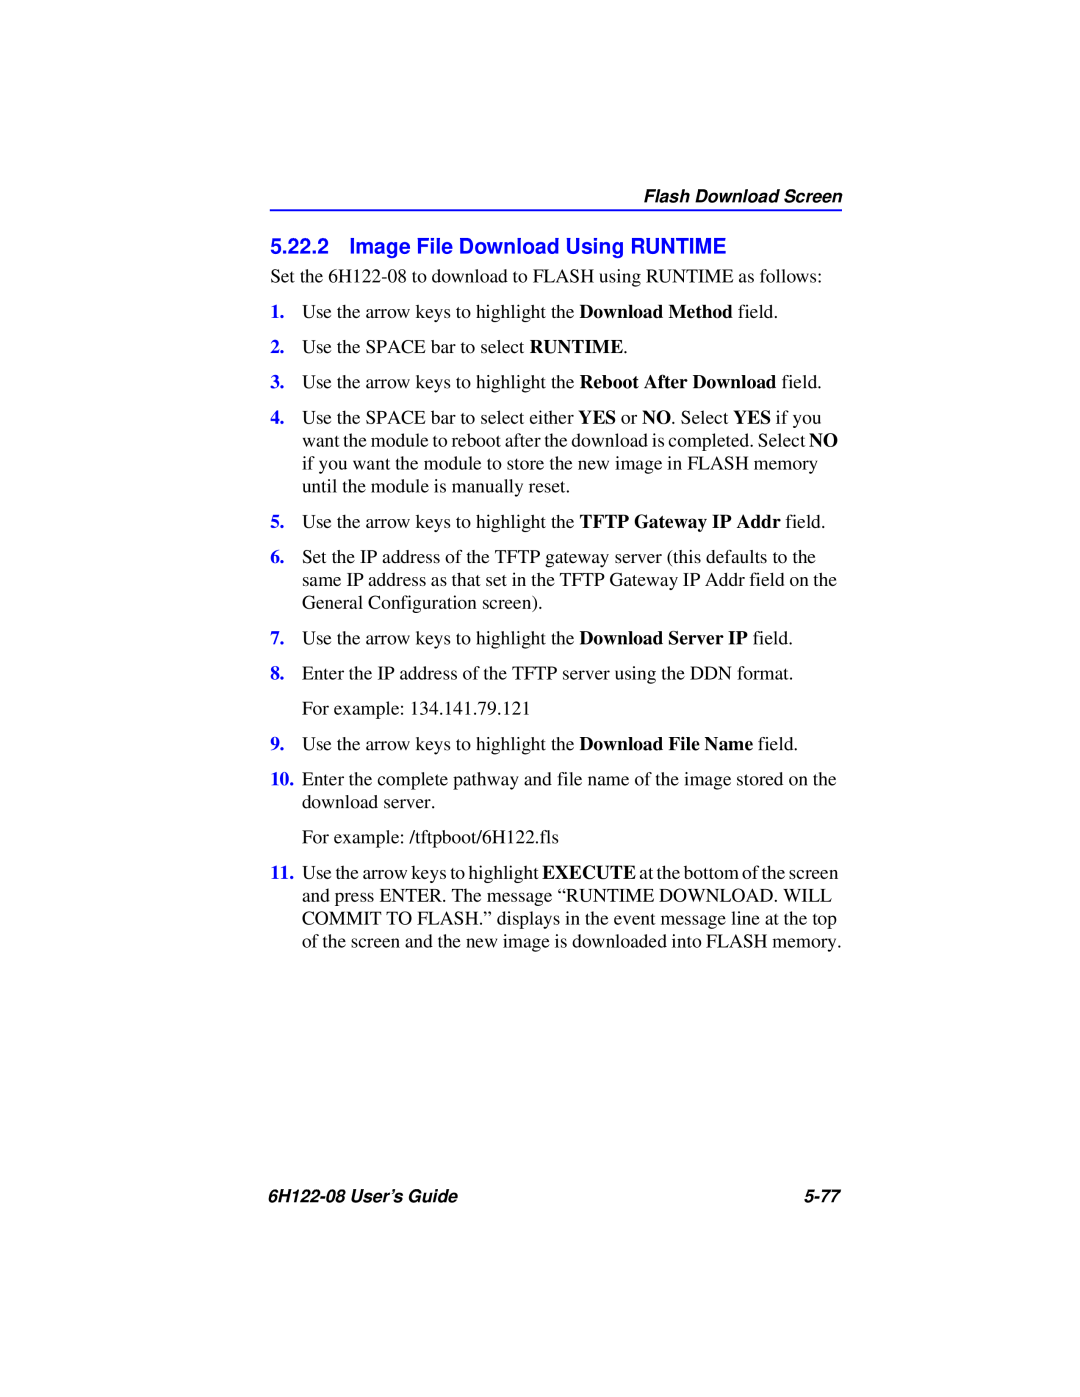 Cabletron Systems 6H122-08 manual Image File Download Using RUNTIME 